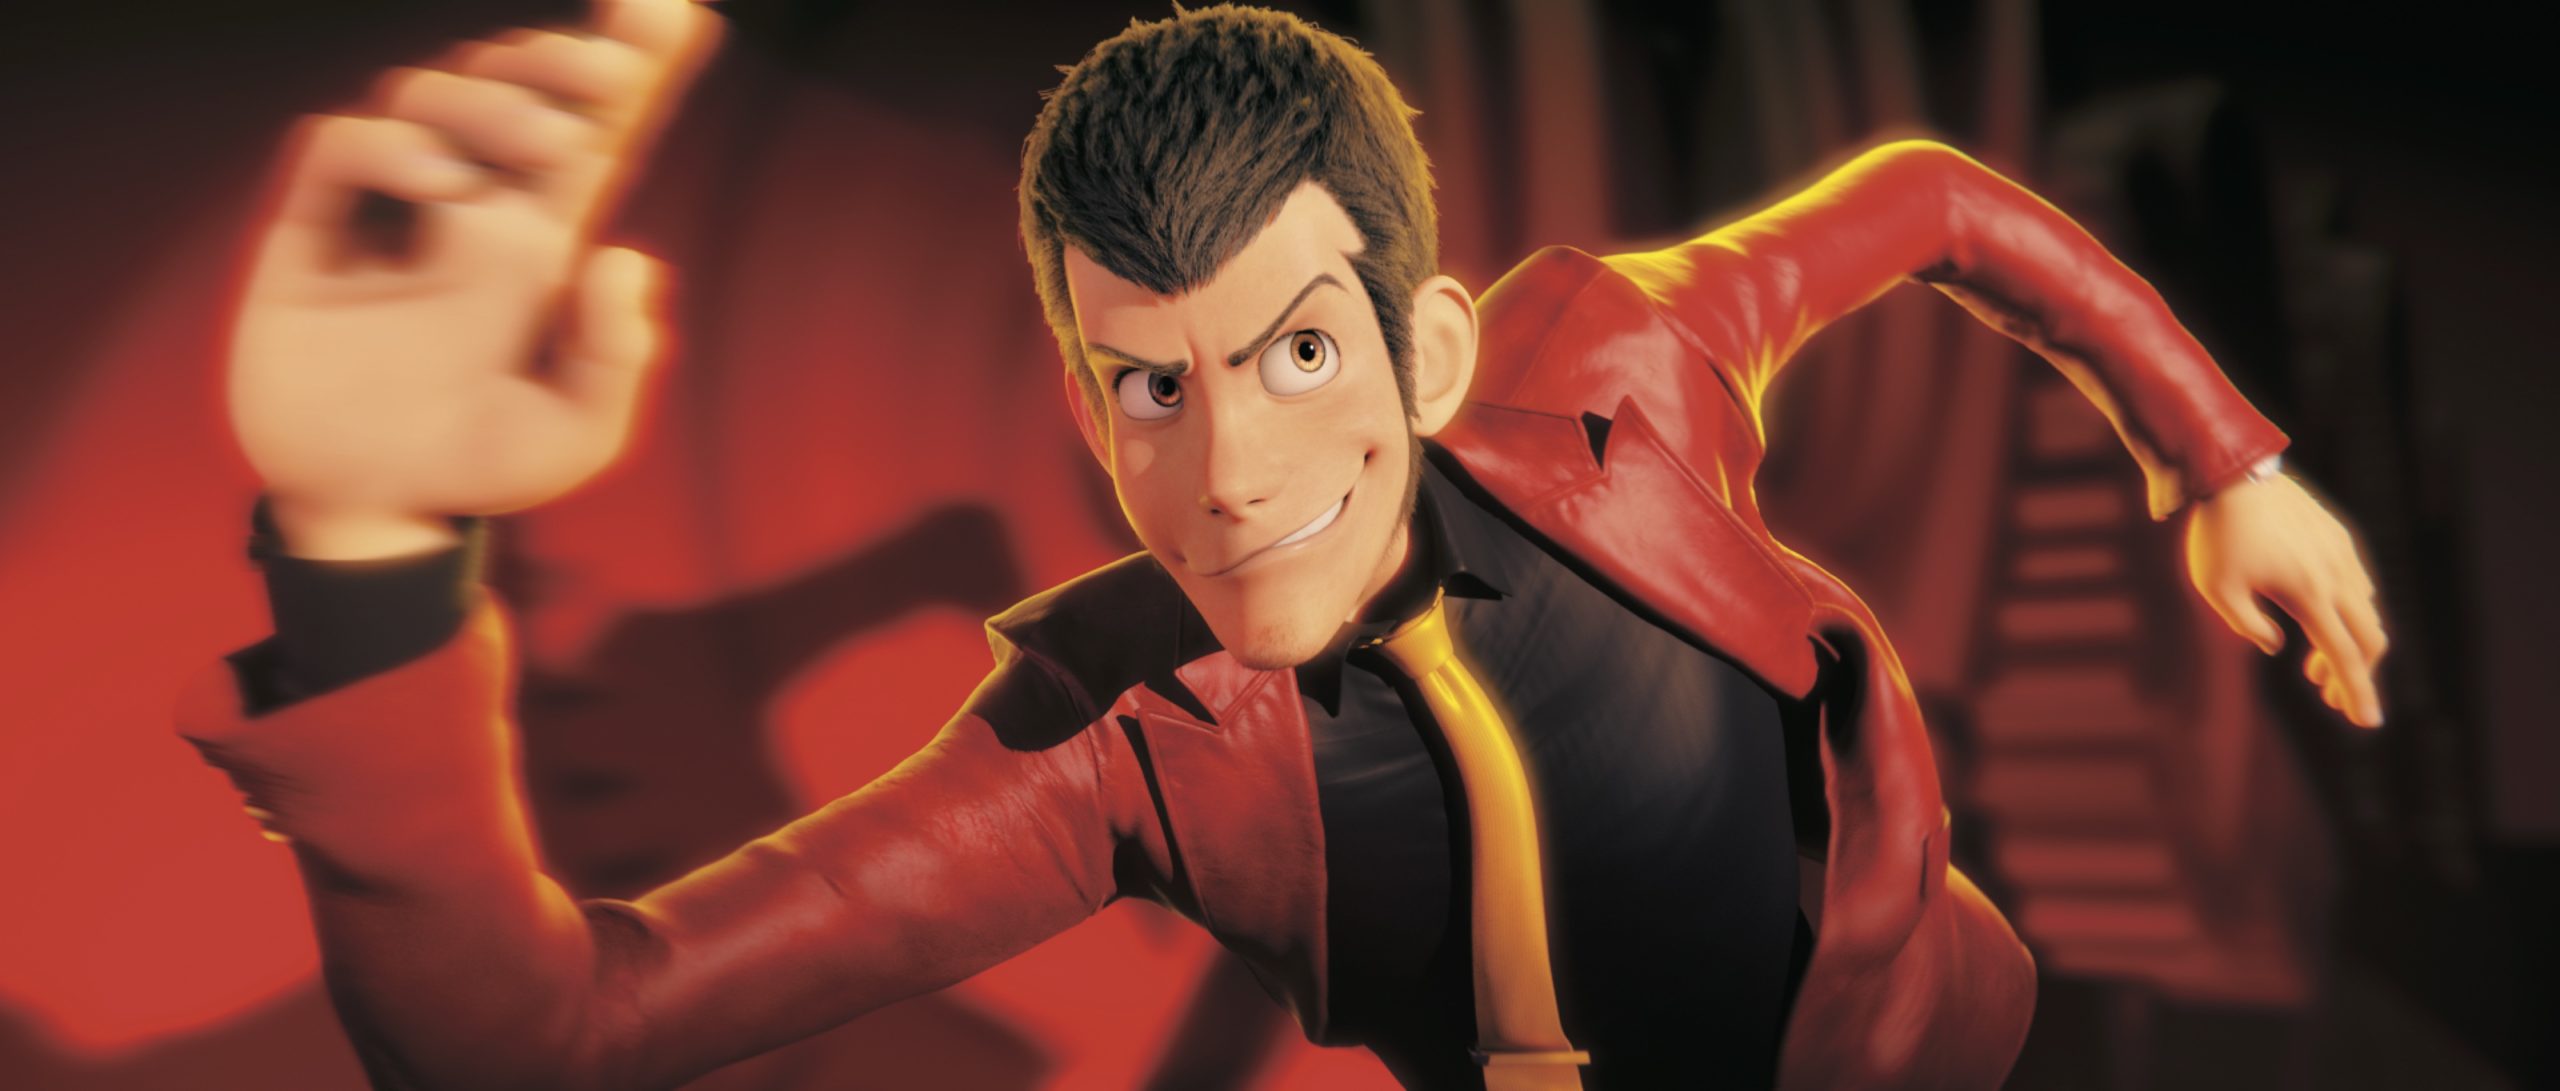 © Monkey Punch / 2019 LUPIN THE 3rd Film Partners. Produced by LUPIN THE 3rd Film Partners. All Rights Reserved. Under License to EUROZOOM. Produced by TMS ENTERTAINMENT CO., LTD.